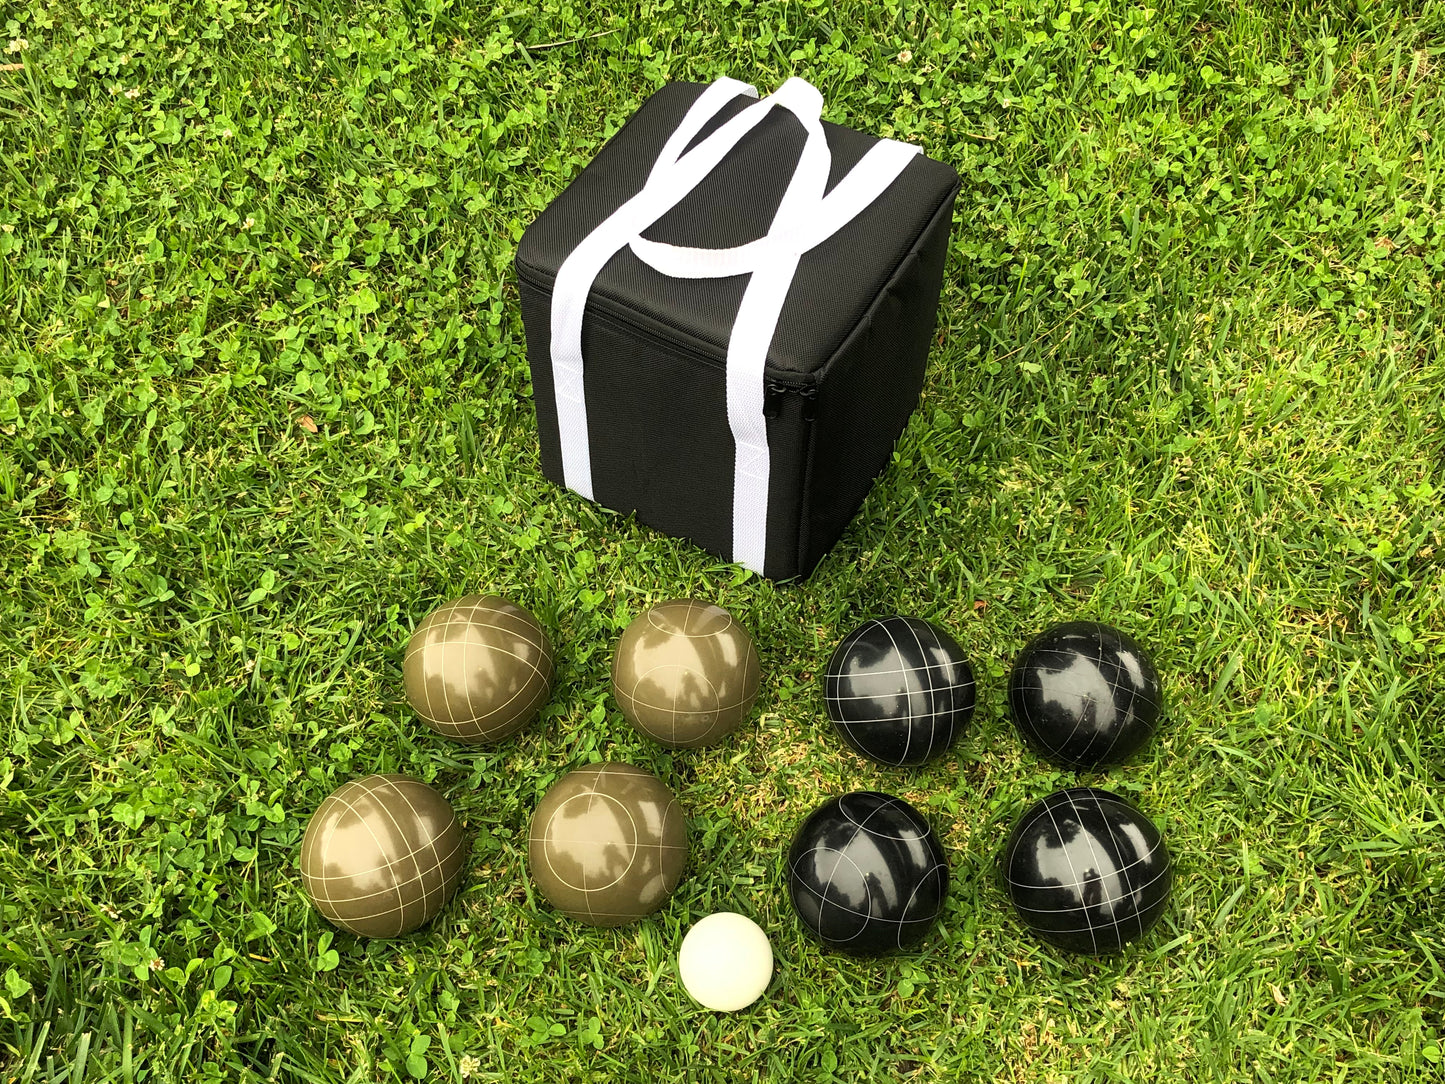 107mm Bocce Olive Brown and Black Balls with Black Bag